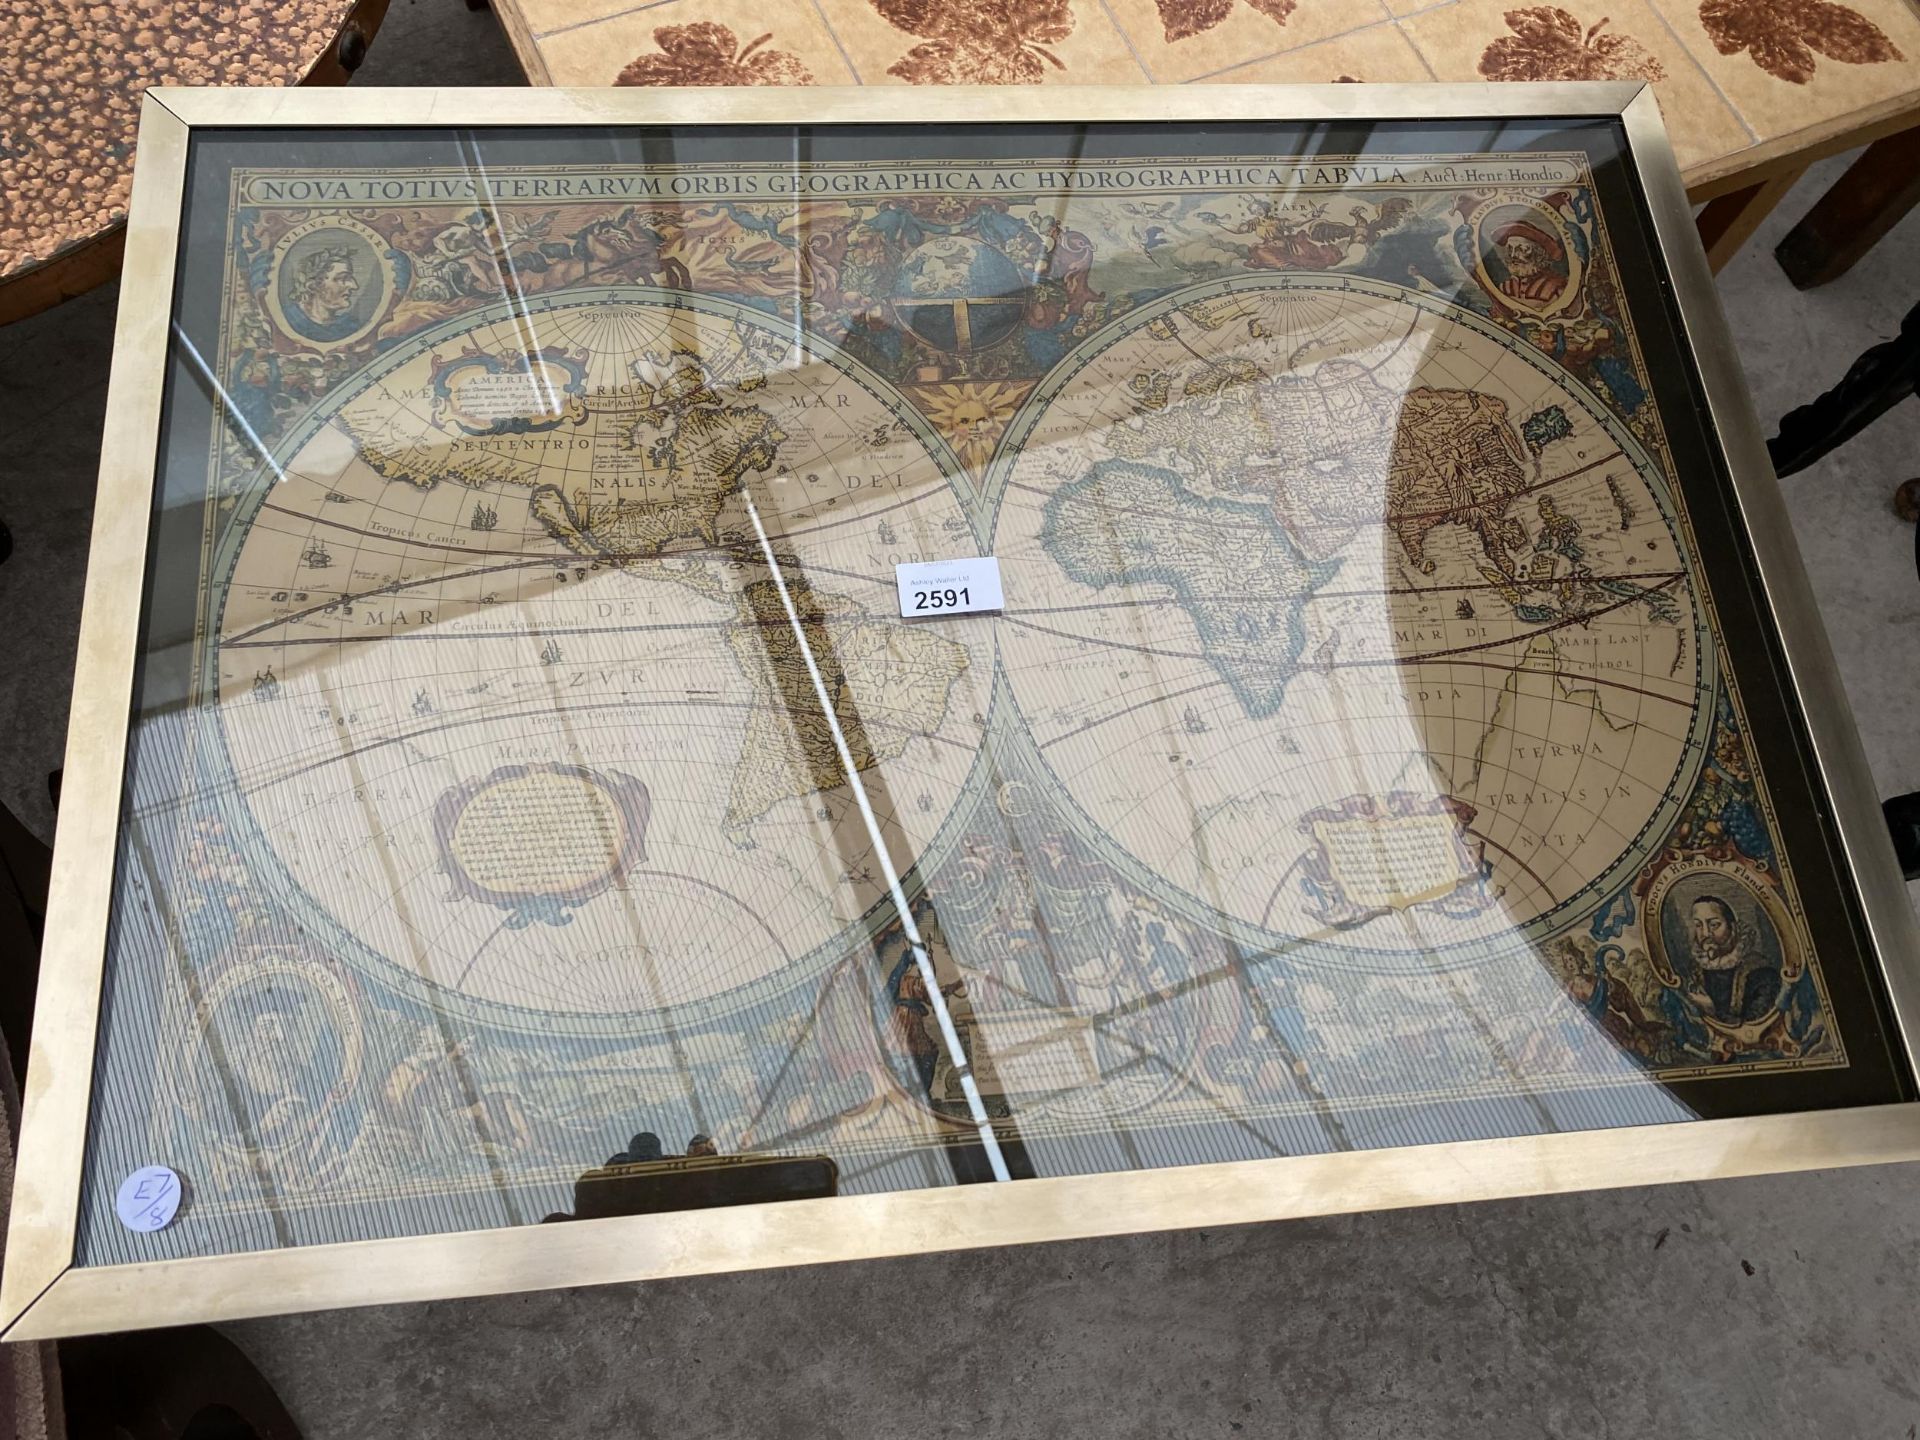 A MODERN COFFEE TABLE, THE TOP INSET WITH VINTAGE STYLE WORLD MAP, 25X18" - Image 2 of 3